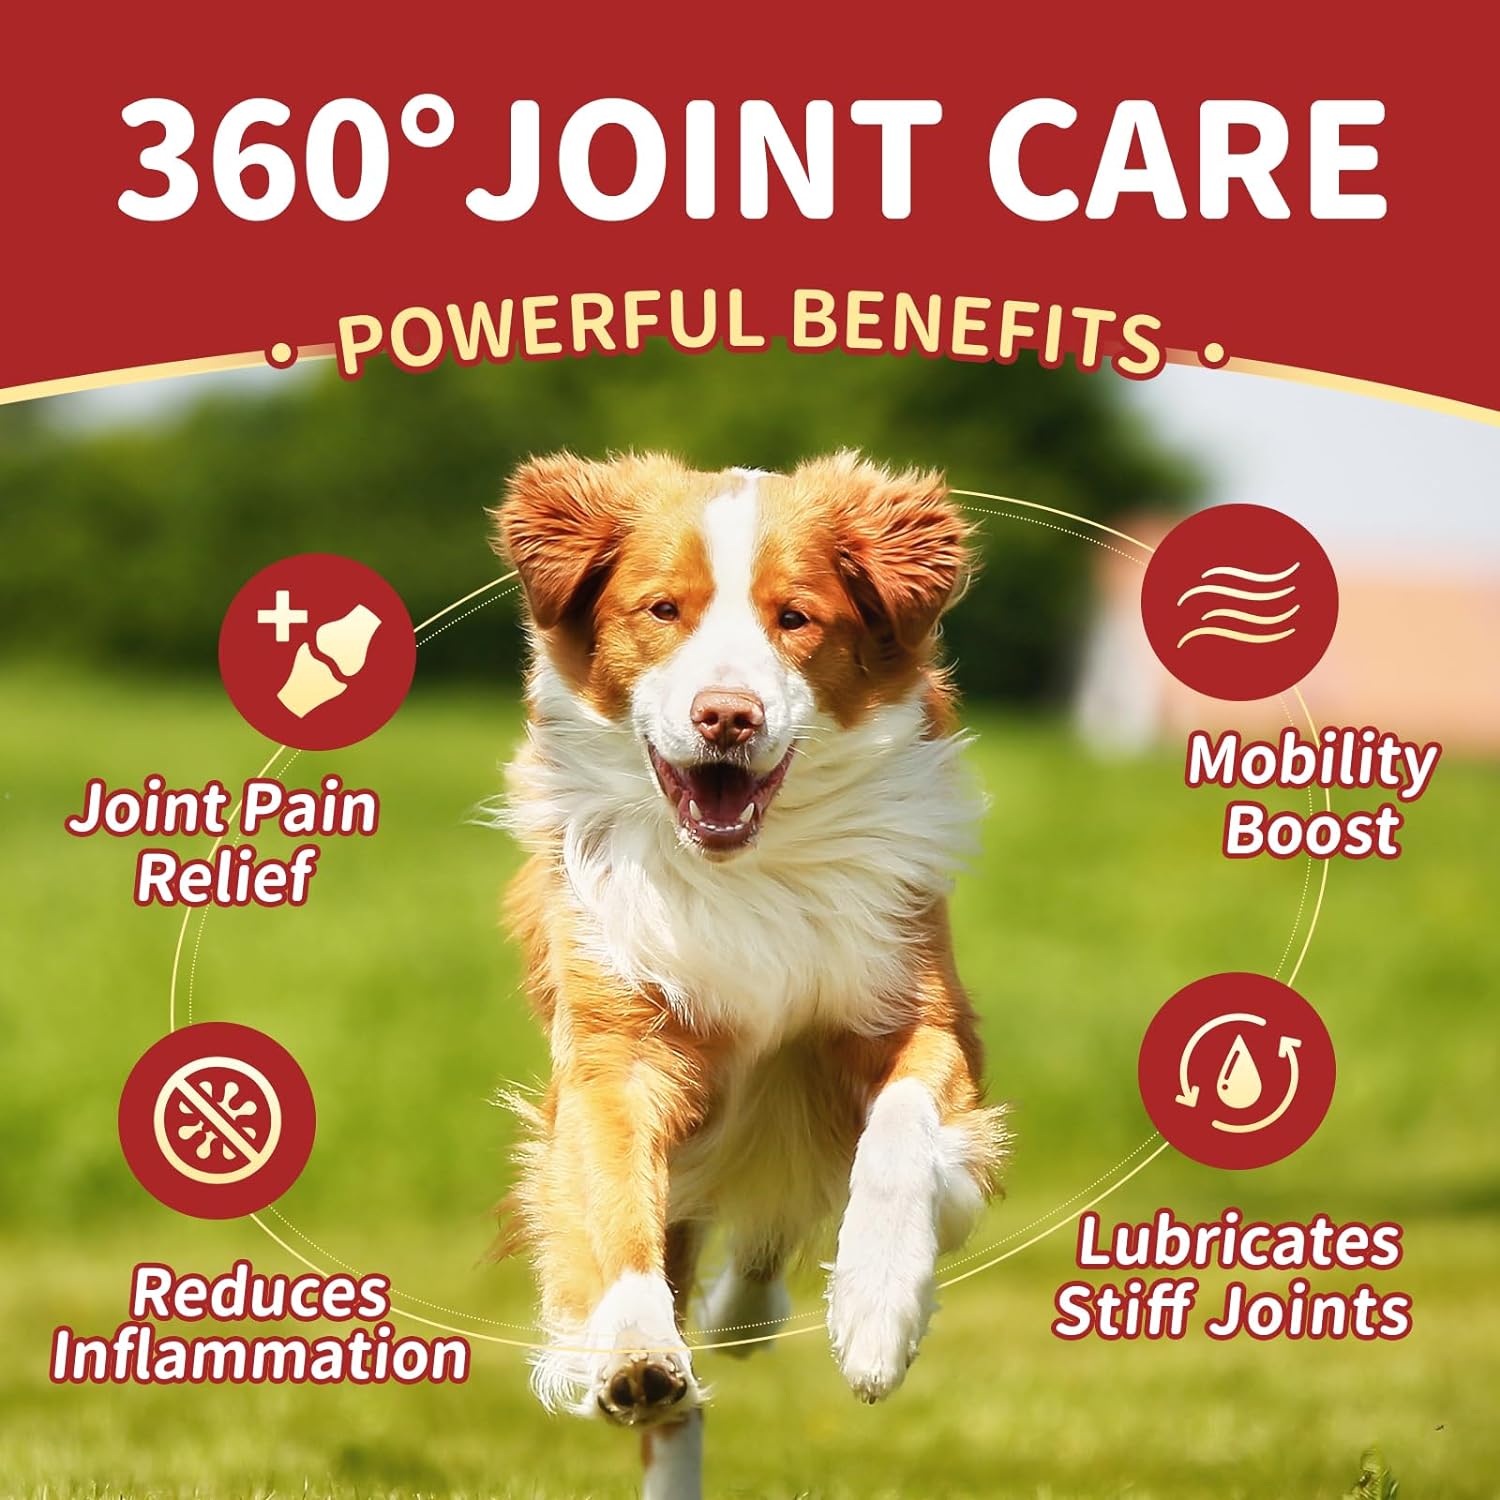 Glucosamine Chews Supplement for Pet Dog, with Joint Health